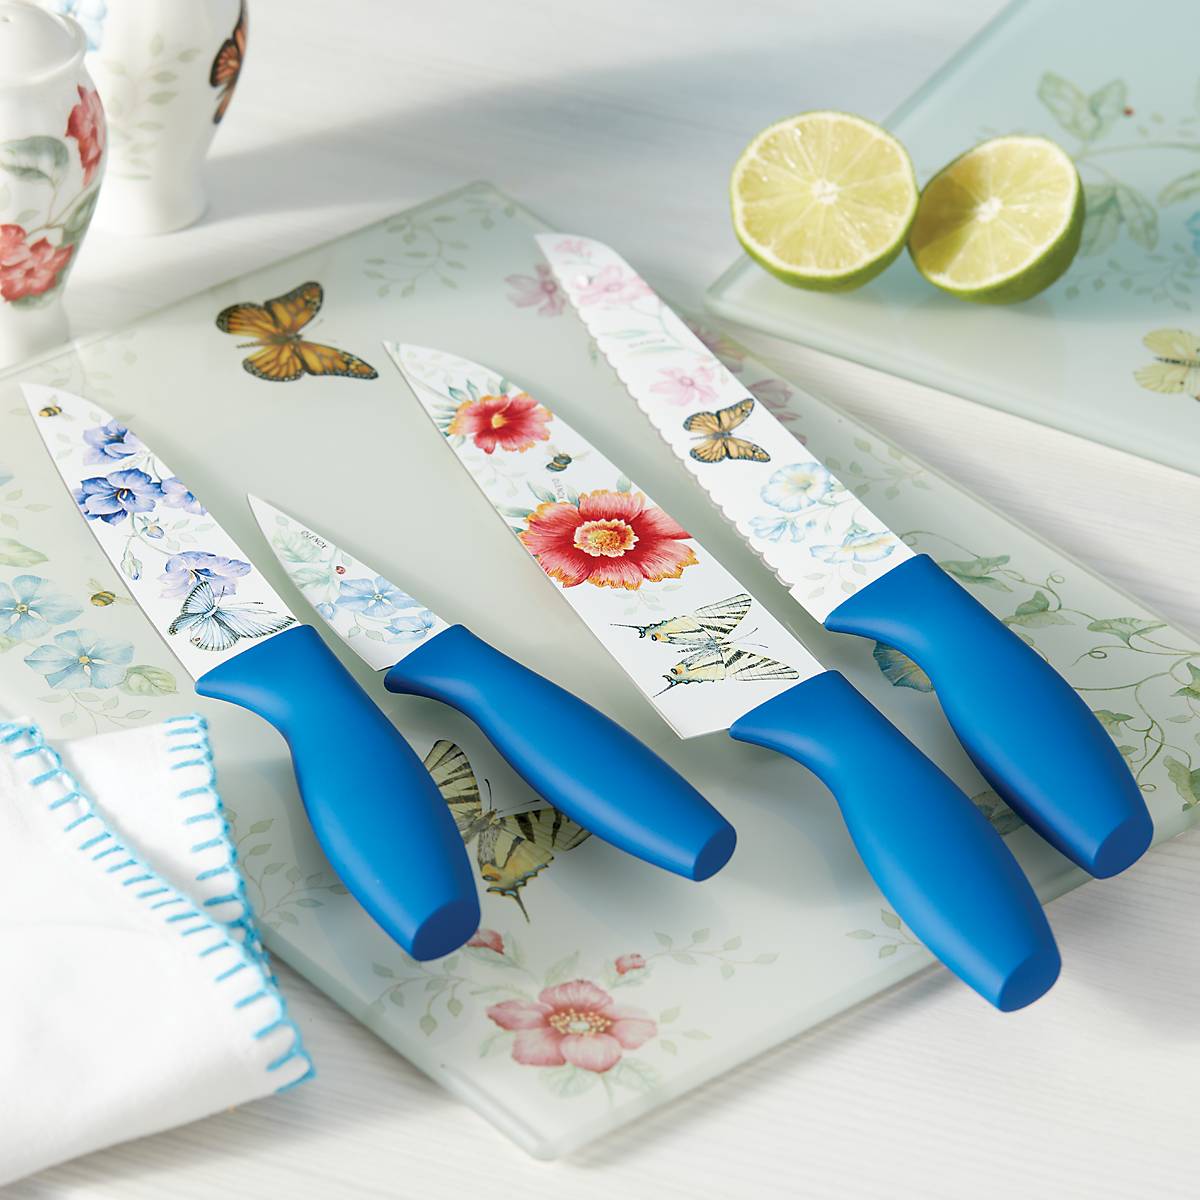 Pioneer Woman Kitchen Accessories, Stainless Steel Kitchen Knives